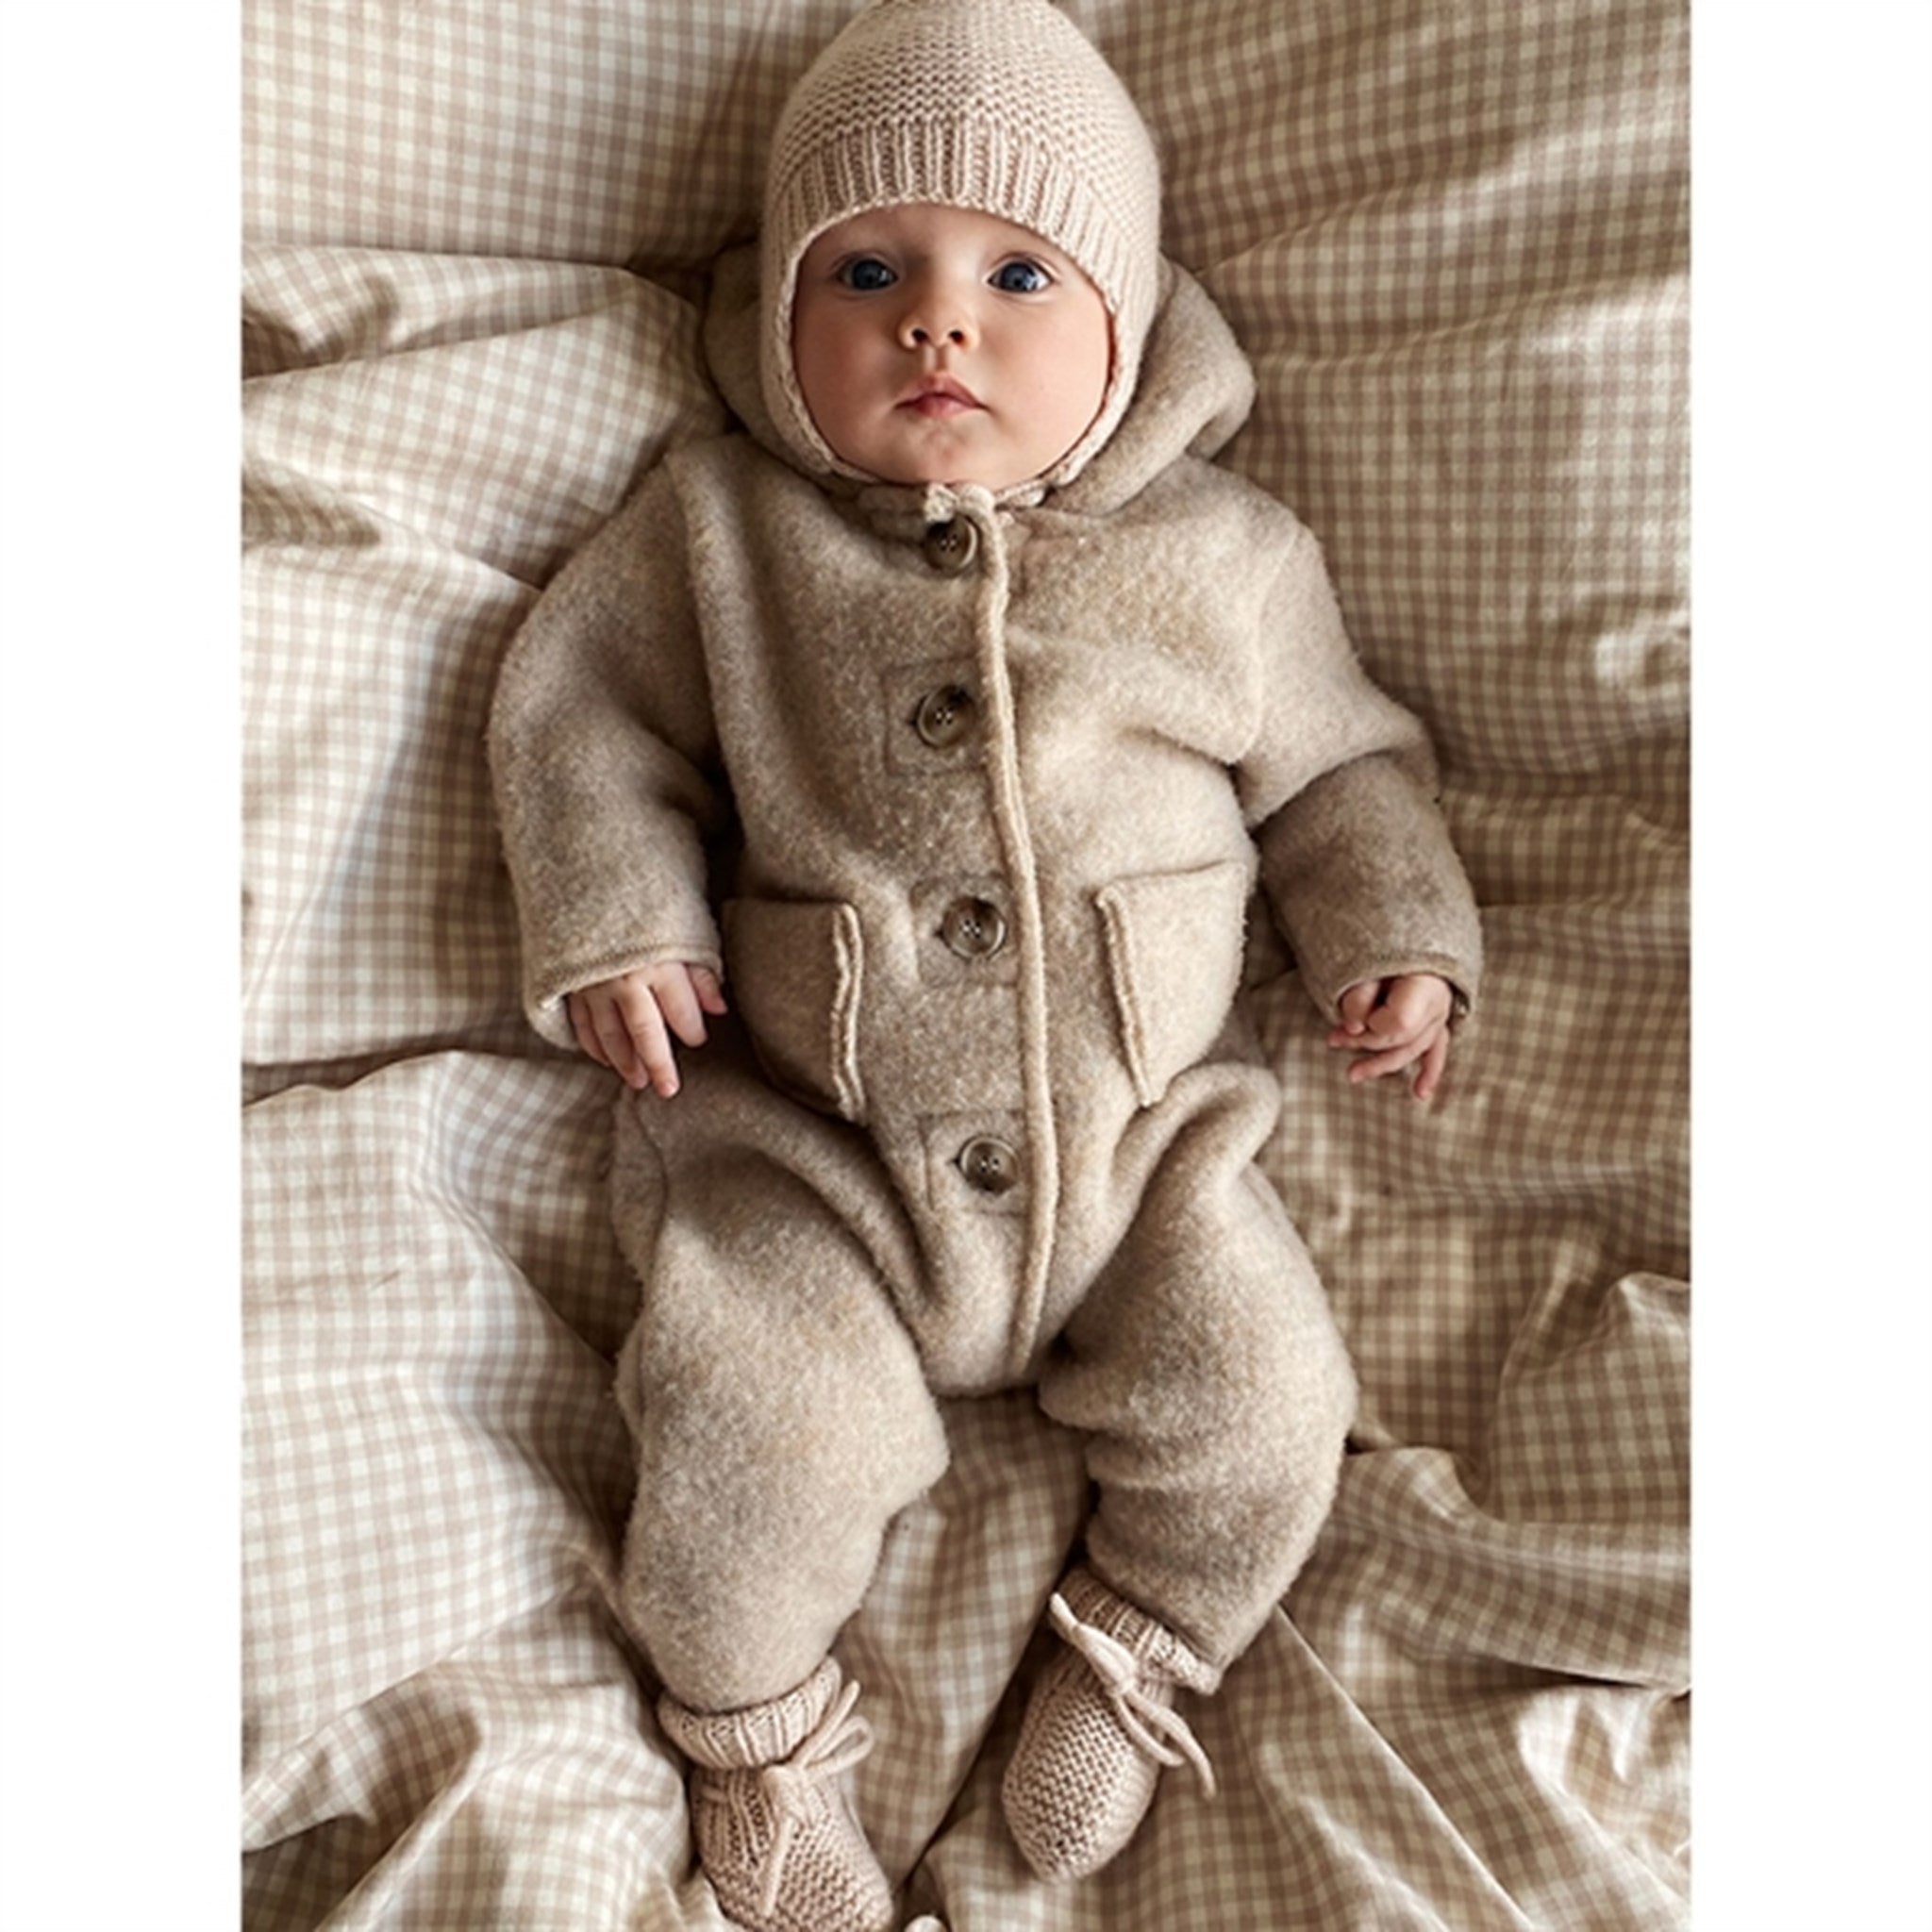 lalaby Oat Teddy Onesies 2